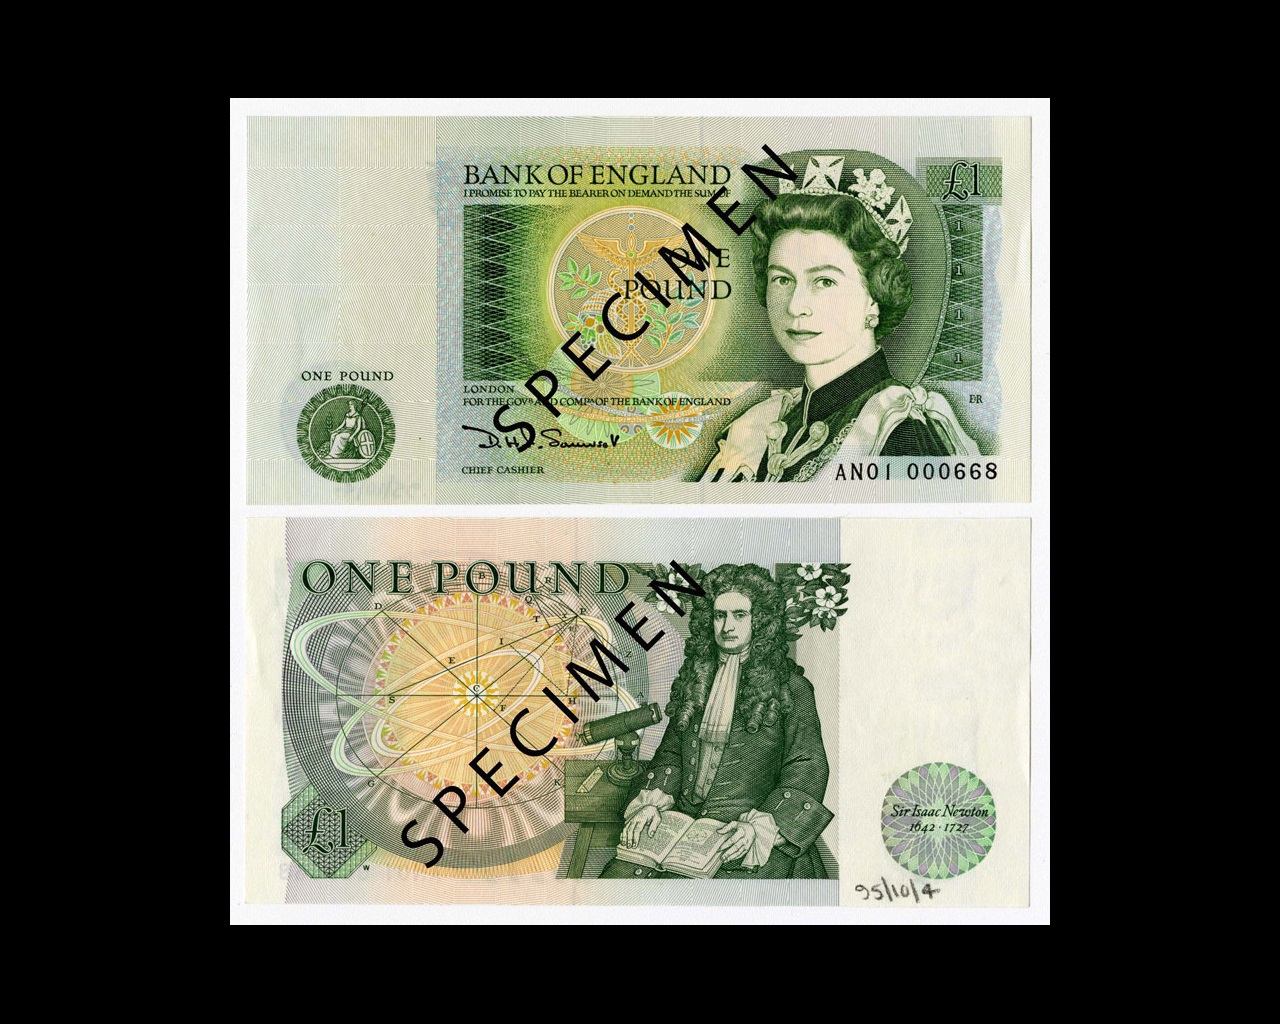 £1 banknote (Series D) showing Isaac Newton, from about 1978-88